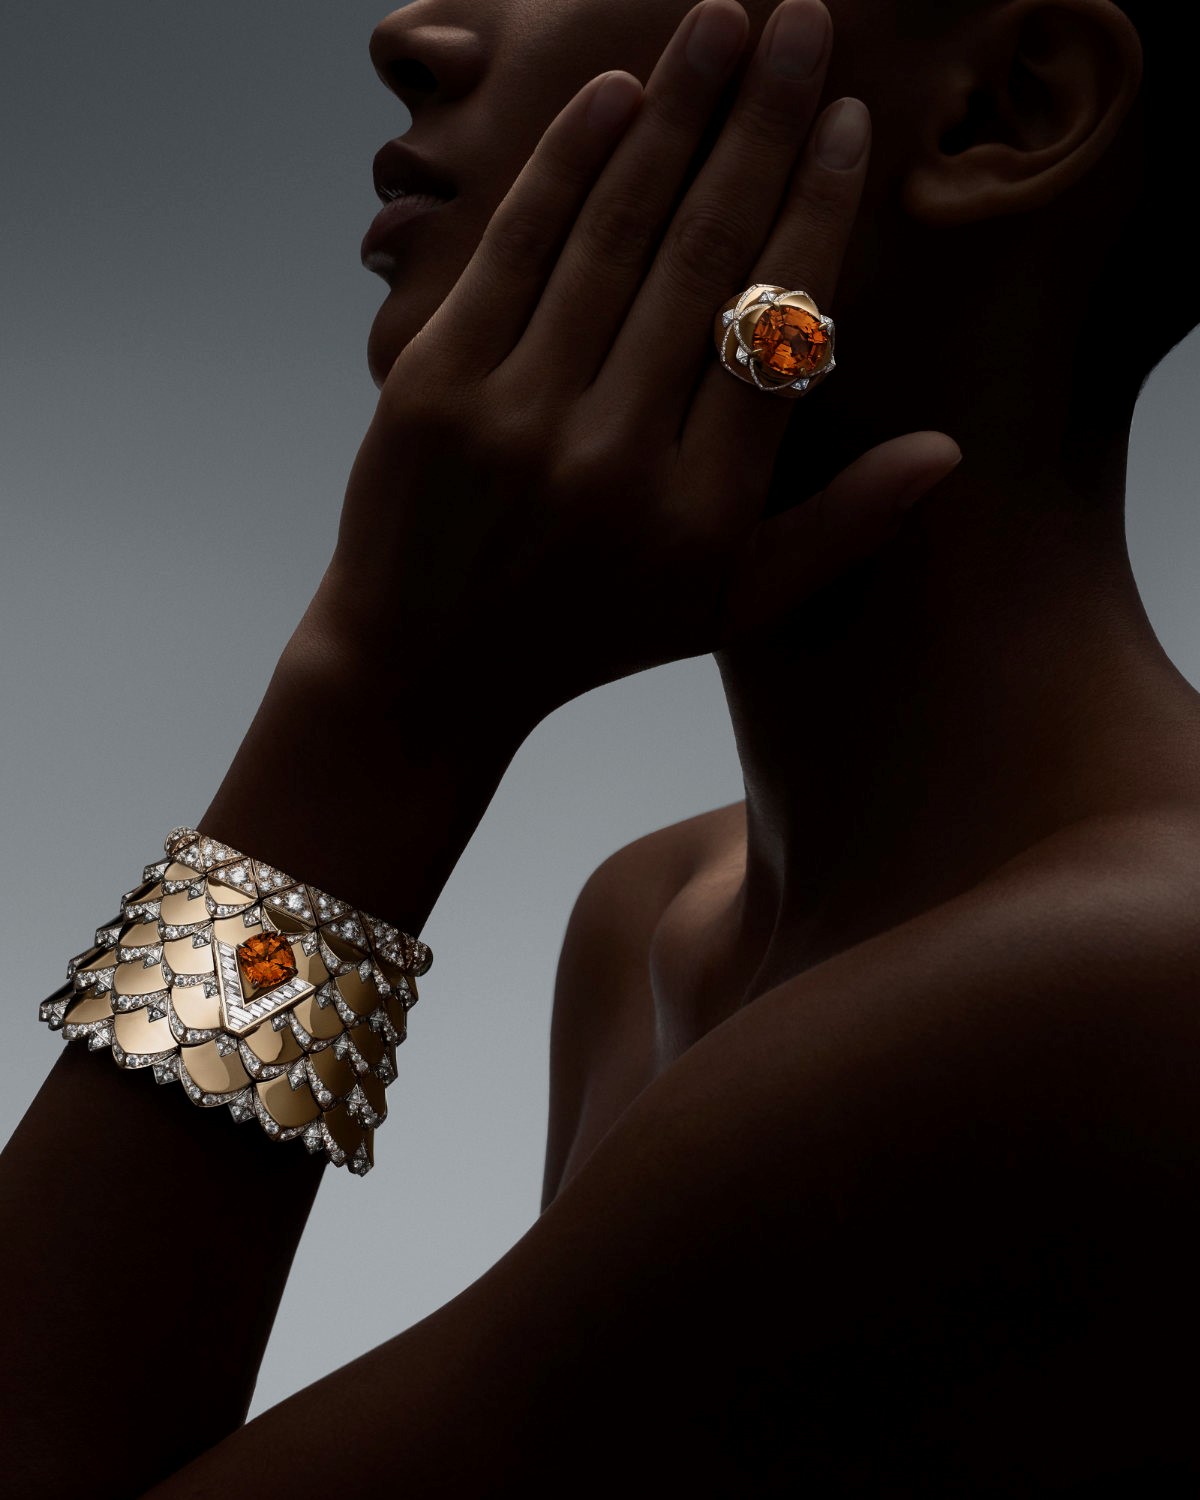 Louis Vuitton Introduces Fifth High Jewelry Collection Titled